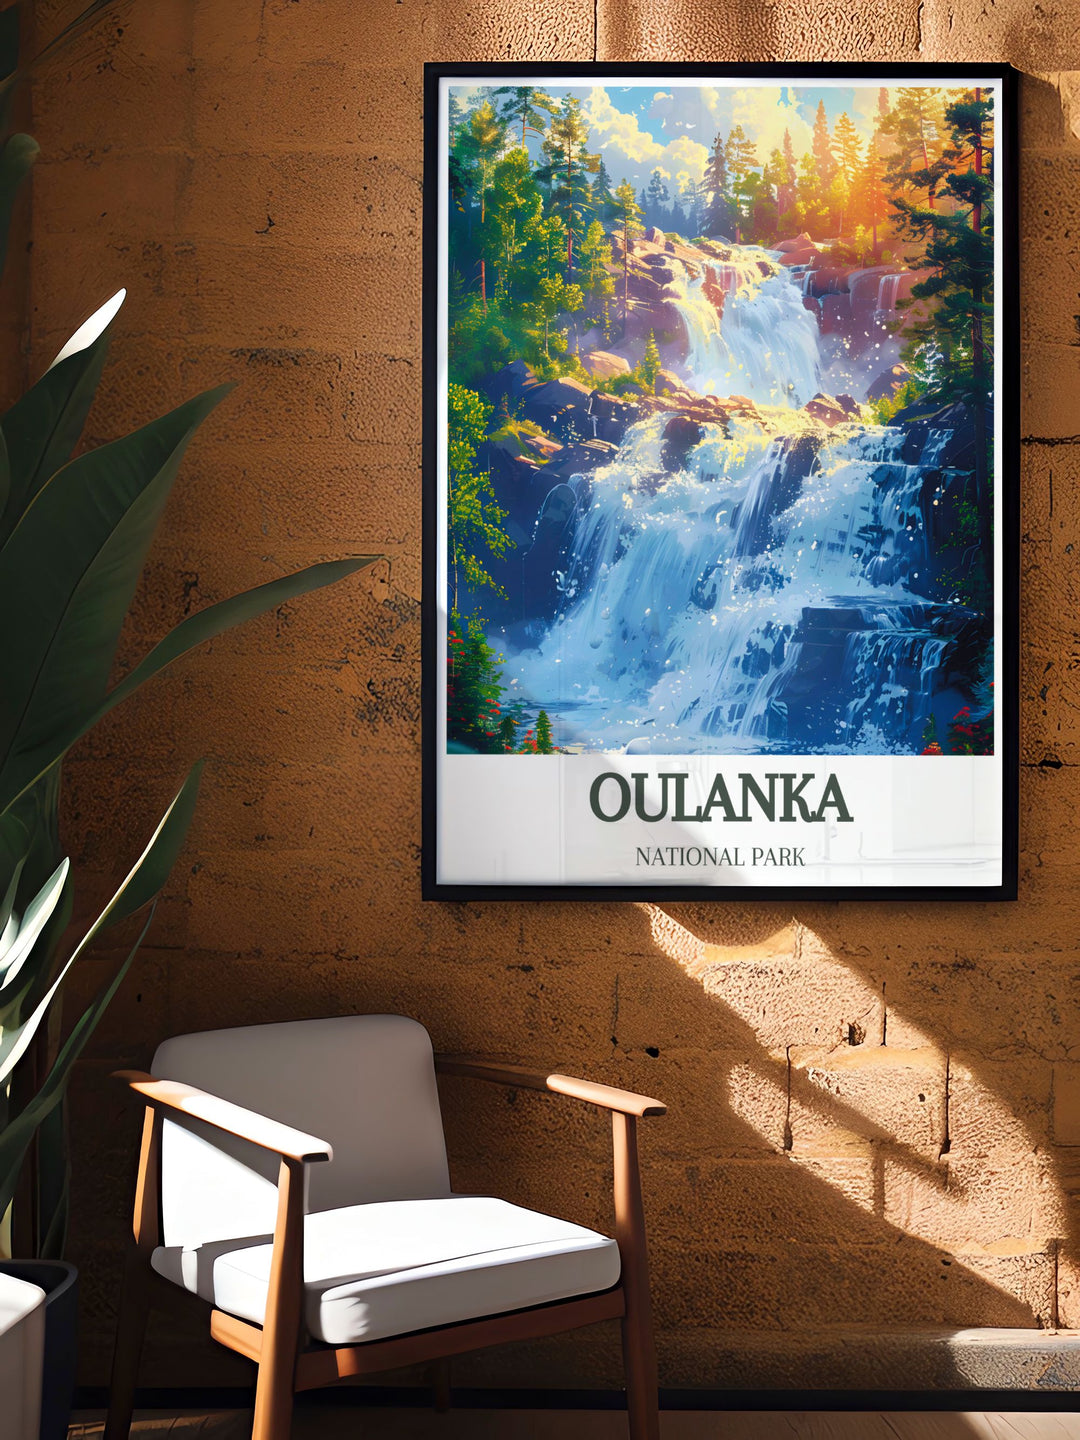 Nature Wall Art print of Kiutakongas Rapids capturing the raw power and serene beauty of the rapids making it a perfect focal point for any room and a thoughtful gift for fellow nature enthusiasts and adventurers